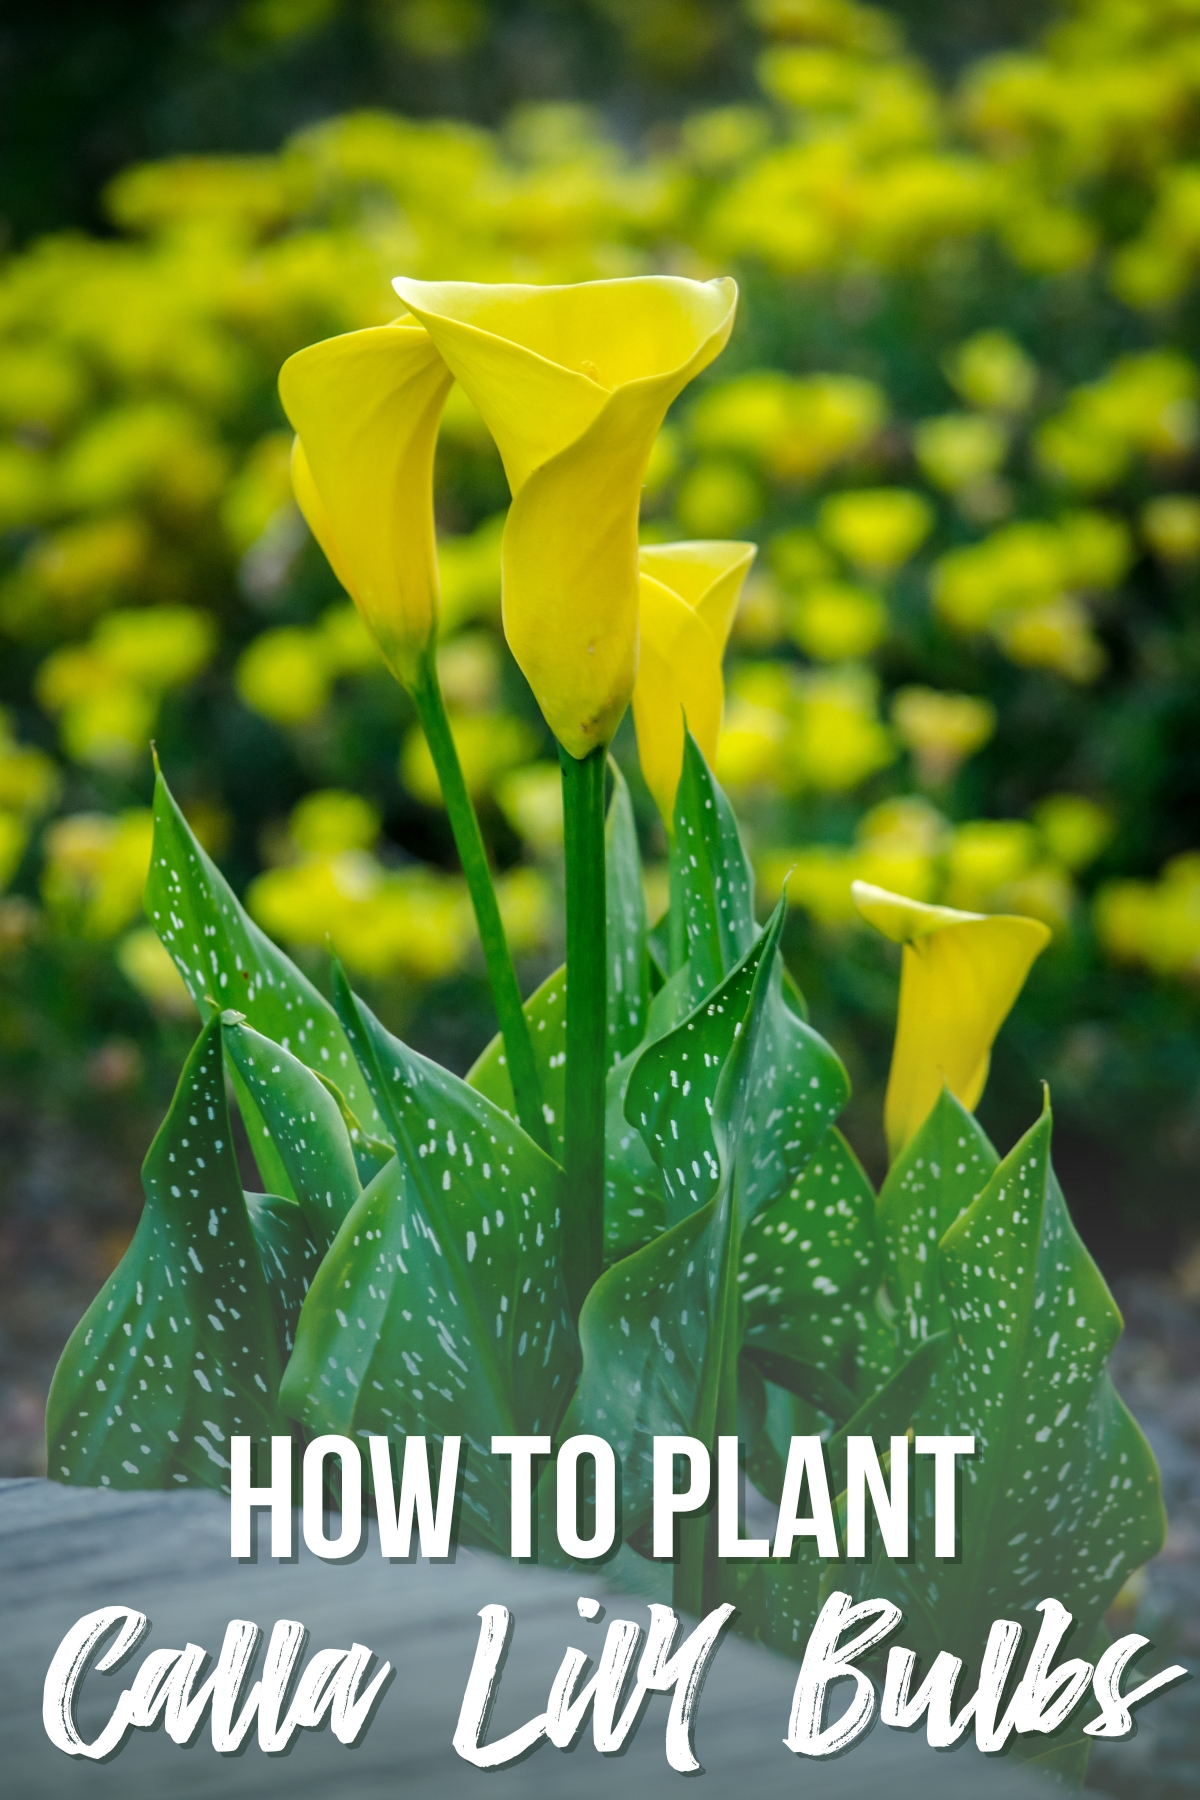 how to plant calla lily bulbs with image of yellow calla lillies in bloom